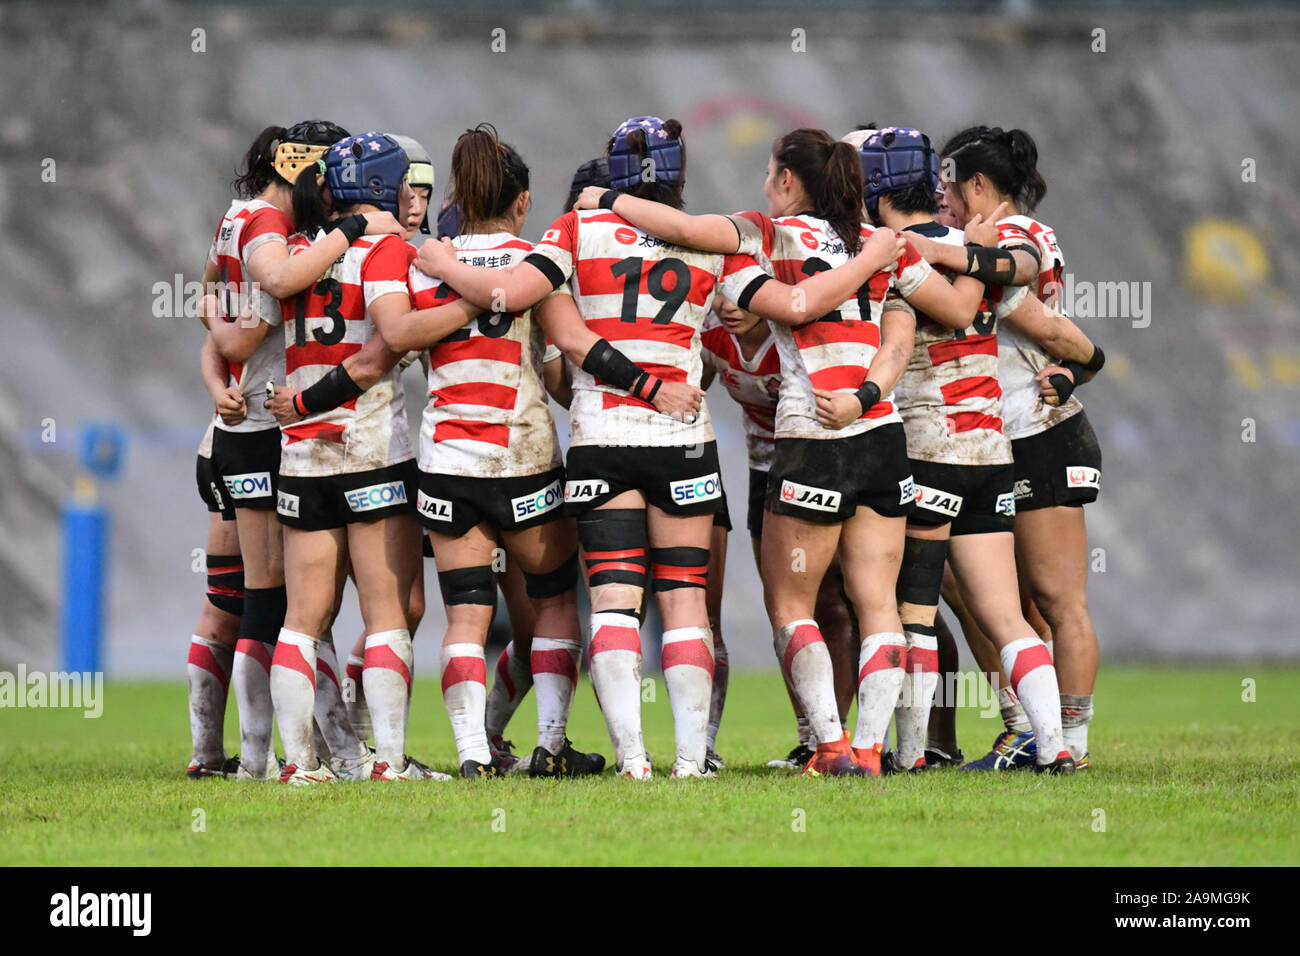 L´Aquila, Italy, 16 Nov 2019, Line Up  of giappone a raccolta during Test Match - Italy Women vs Japan - Italian Rugby National Team - Credit: LPS/Lorenzo Di Cola/Alamy Live News Stock Photo